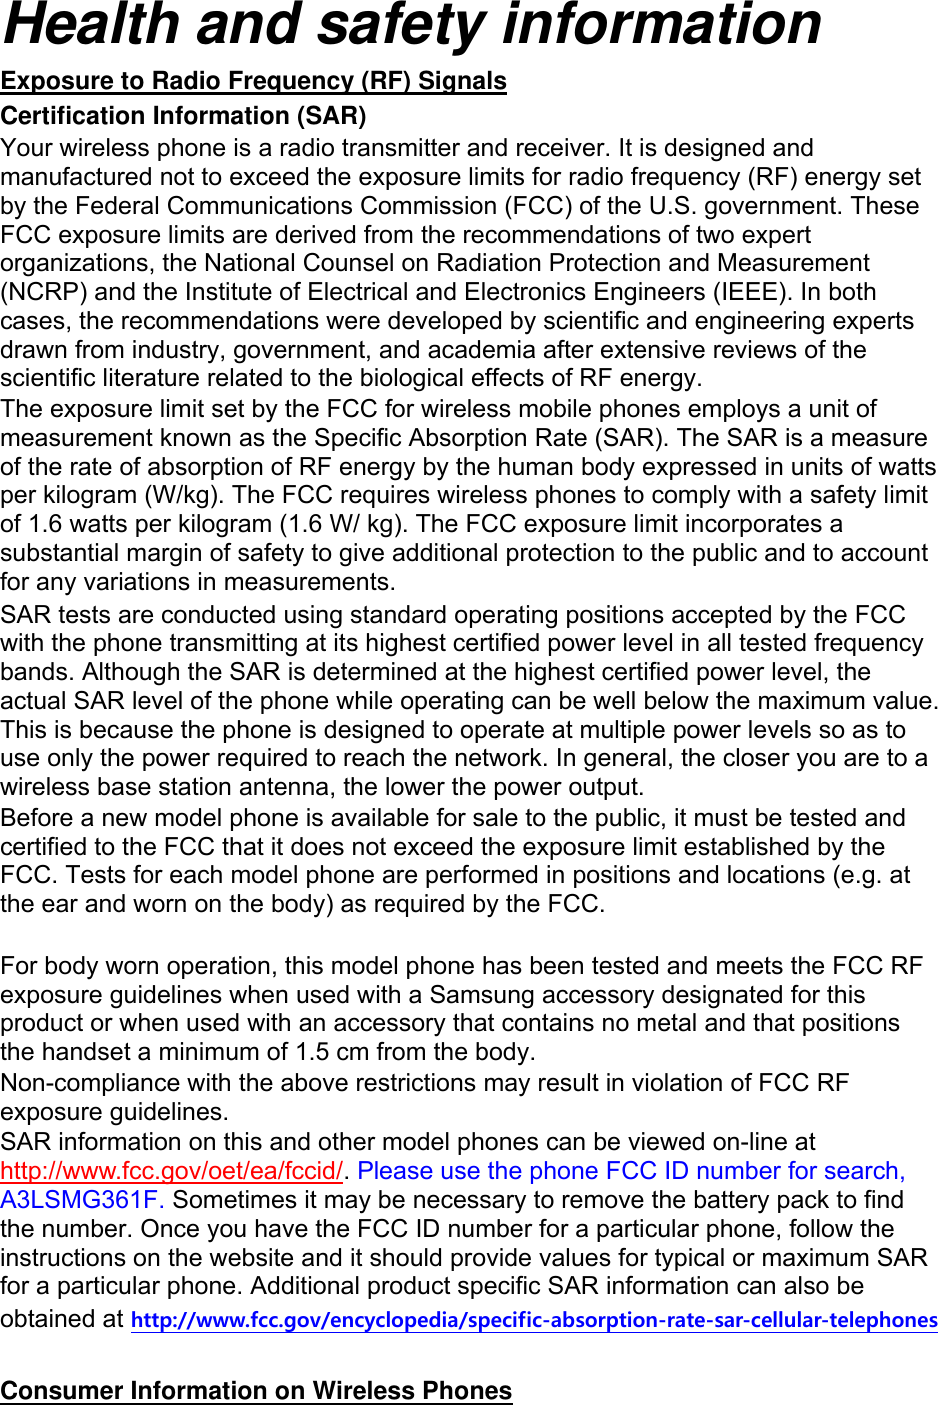 Health and safety information Exposure to Radio Frequency (RF) Signals Certification Information (SAR) Your wireless phone is a radio transmitter and receiver. It is designed and manufactured not to exceed the exposure limits for radio frequency (RF) energy set by the Federal Communications Commission (FCC) of the U.S. government. These FCC exposure limits are derived from the recommendations of two expert organizations, the National Counsel on Radiation Protection and Measurement (NCRP) and the Institute of Electrical and Electronics Engineers (IEEE). In both cases, the recommendations were developed by scientific and engineering experts drawn from industry, government, and academia after extensive reviews of the scientific literature related to the biological effects of RF energy. The exposure limit set by the FCC for wireless mobile phones employs a unit of measurement known as the Specific Absorption Rate (SAR). The SAR is a measure of the rate of absorption of RF energy by the human body expressed in units of watts per kilogram (W/kg). The FCC requires wireless phones to comply with a safety limit of 1.6 watts per kilogram (1.6 W/ kg). The FCC exposure limit incorporates a substantial margin of safety to give additional protection to the public and to account for any variations in measurements. SAR tests are conducted using standard operating positions accepted by the FCC with the phone transmitting at its highest certified power level in all tested frequency bands. Although the SAR is determined at the highest certified power level, the actual SAR level of the phone while operating can be well below the maximum value. This is because the phone is designed to operate at multiple power levels so as to use only the power required to reach the network. In general, the closer you are to a wireless base station antenna, the lower the power output. Before a new model phone is available for sale to the public, it must be tested and certified to the FCC that it does not exceed the exposure limit established by the FCC. Tests for each model phone are performed in positions and locations (e.g. at the ear and worn on the body) as required by the FCC.      For body worn operation, this model phone has been tested and meets the FCC RF exposure guidelines when used with a Samsung accessory designated for this product or when used with an accessory that contains no metal and that positions the handset a minimum of 1.5 cm from the body.   Non-compliance with the above restrictions may result in violation of FCC RF exposure guidelines. SAR information on this and other model phones can be viewed on-line at http://www.fcc.gov/oet/ea/fccid/. Please use the phone FCC ID number for search, A3LSMG361F. Sometimes it may be necessary to remove the battery pack to find the number. Once you have the FCC ID number for a particular phone, follow the instructions on the website and it should provide values for typical or maximum SAR for a particular phone. Additional product specific SAR information can also be obtained at http://www.fcc.gov/encyclopedia/specific-absorption-rate-sar-cellular-telephones  Consumer Information on Wireless Phones 